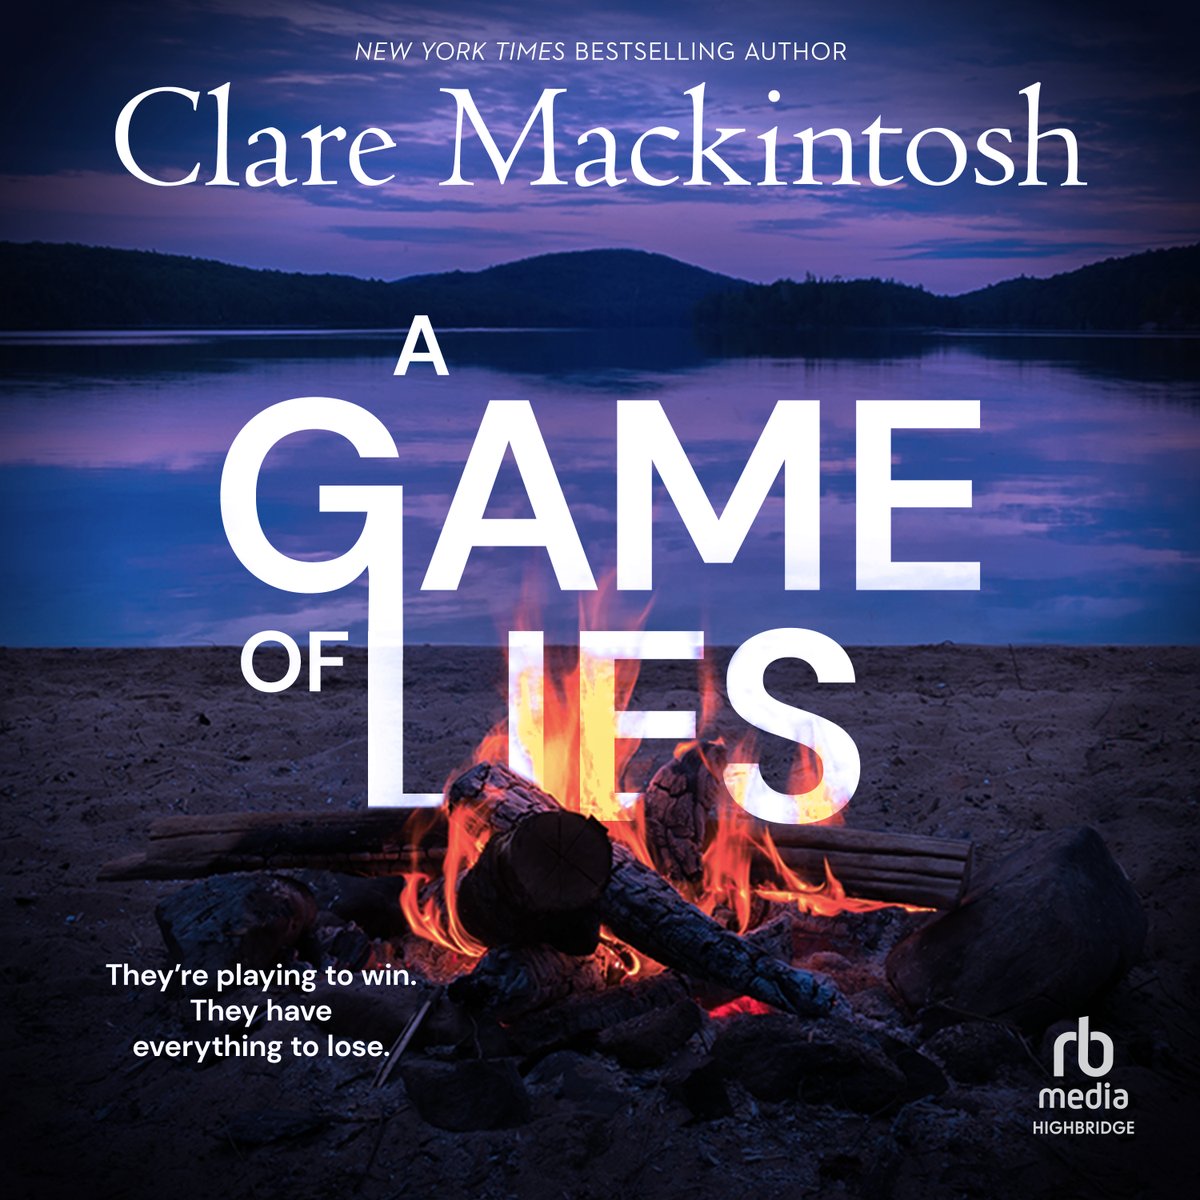 They say the camera never lies. But on this show, you can't trust anything you see. Performed by Chloe Angharad Davies #newrelease #audiobook #thriller @claremackint0sh